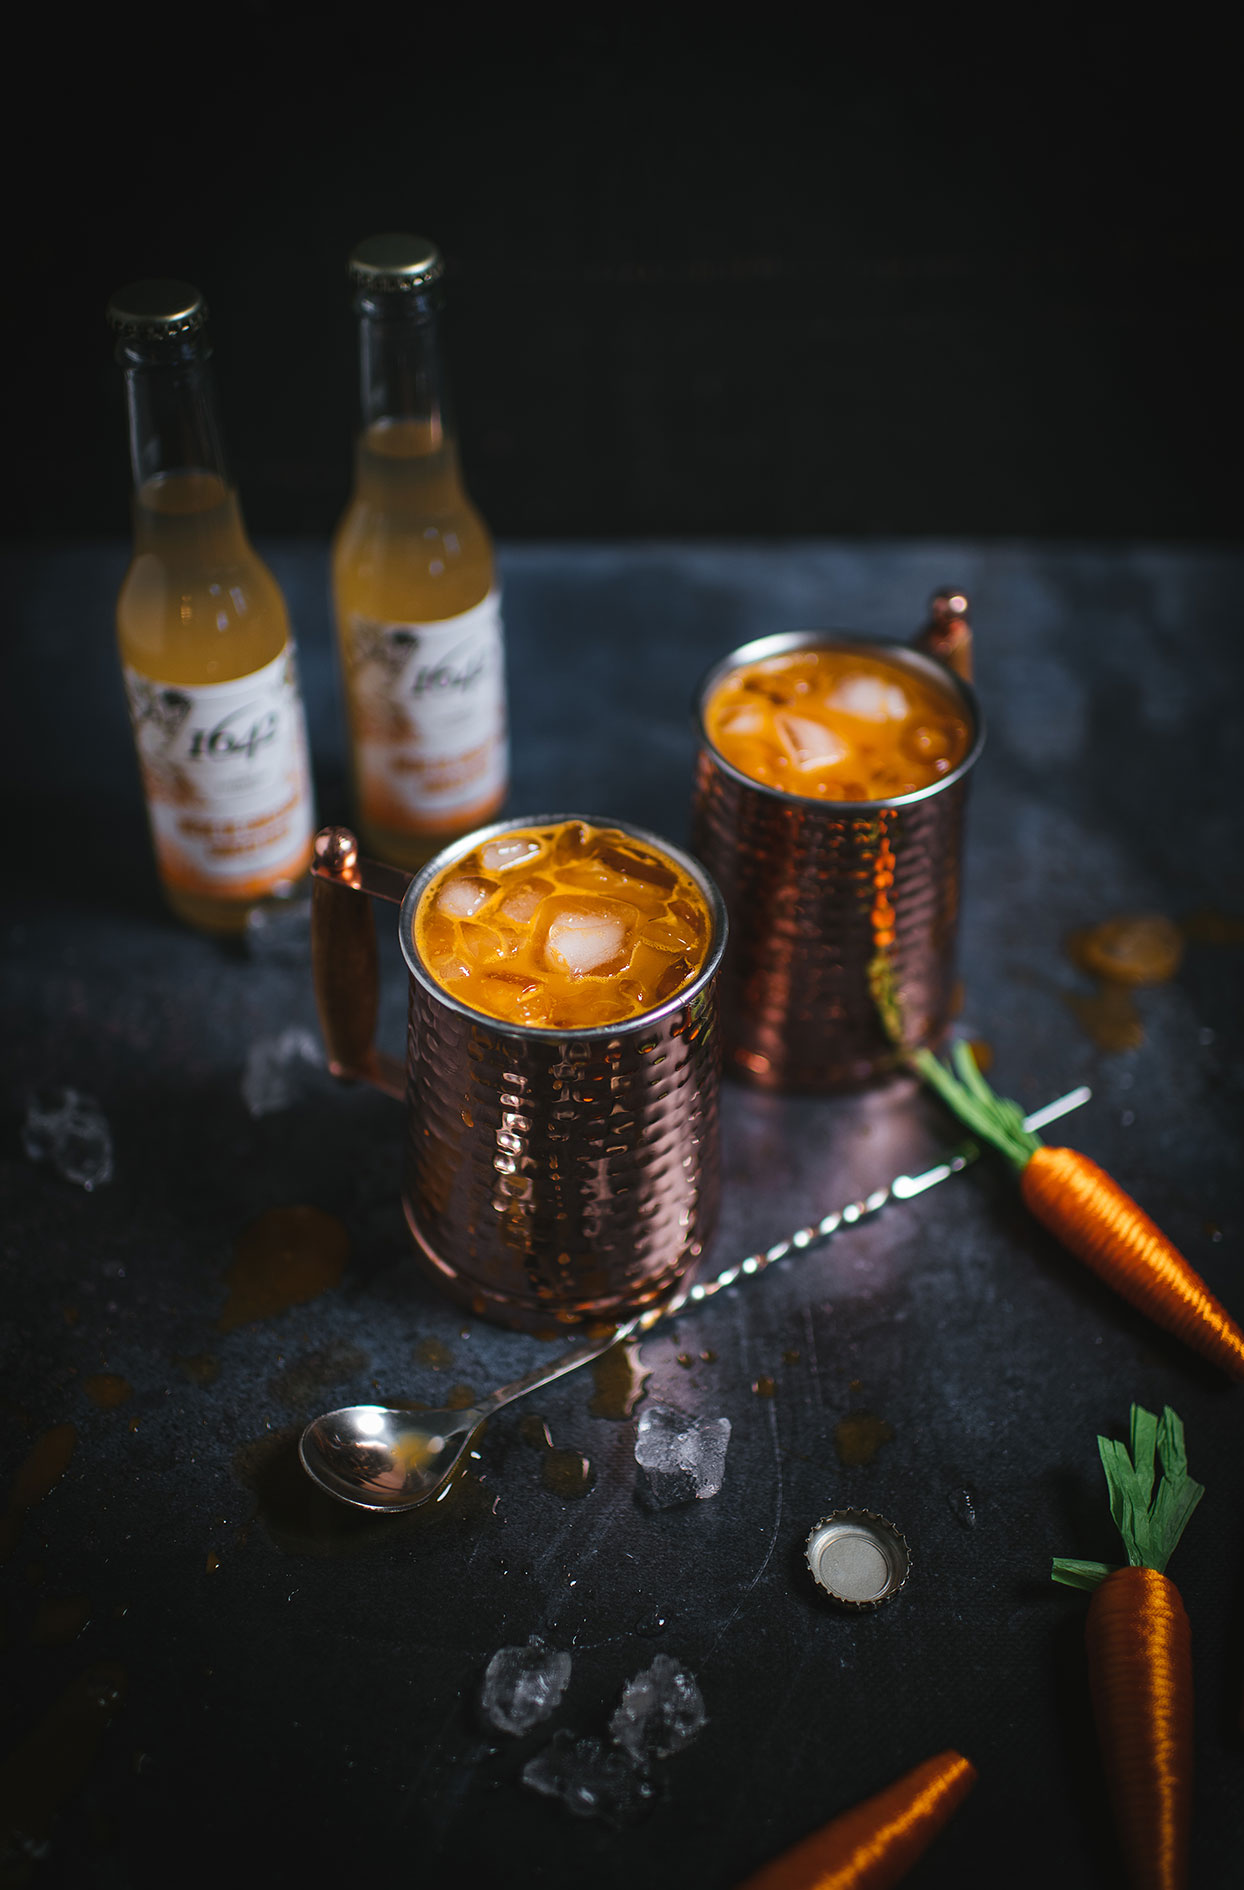 Carrot Moscow mule